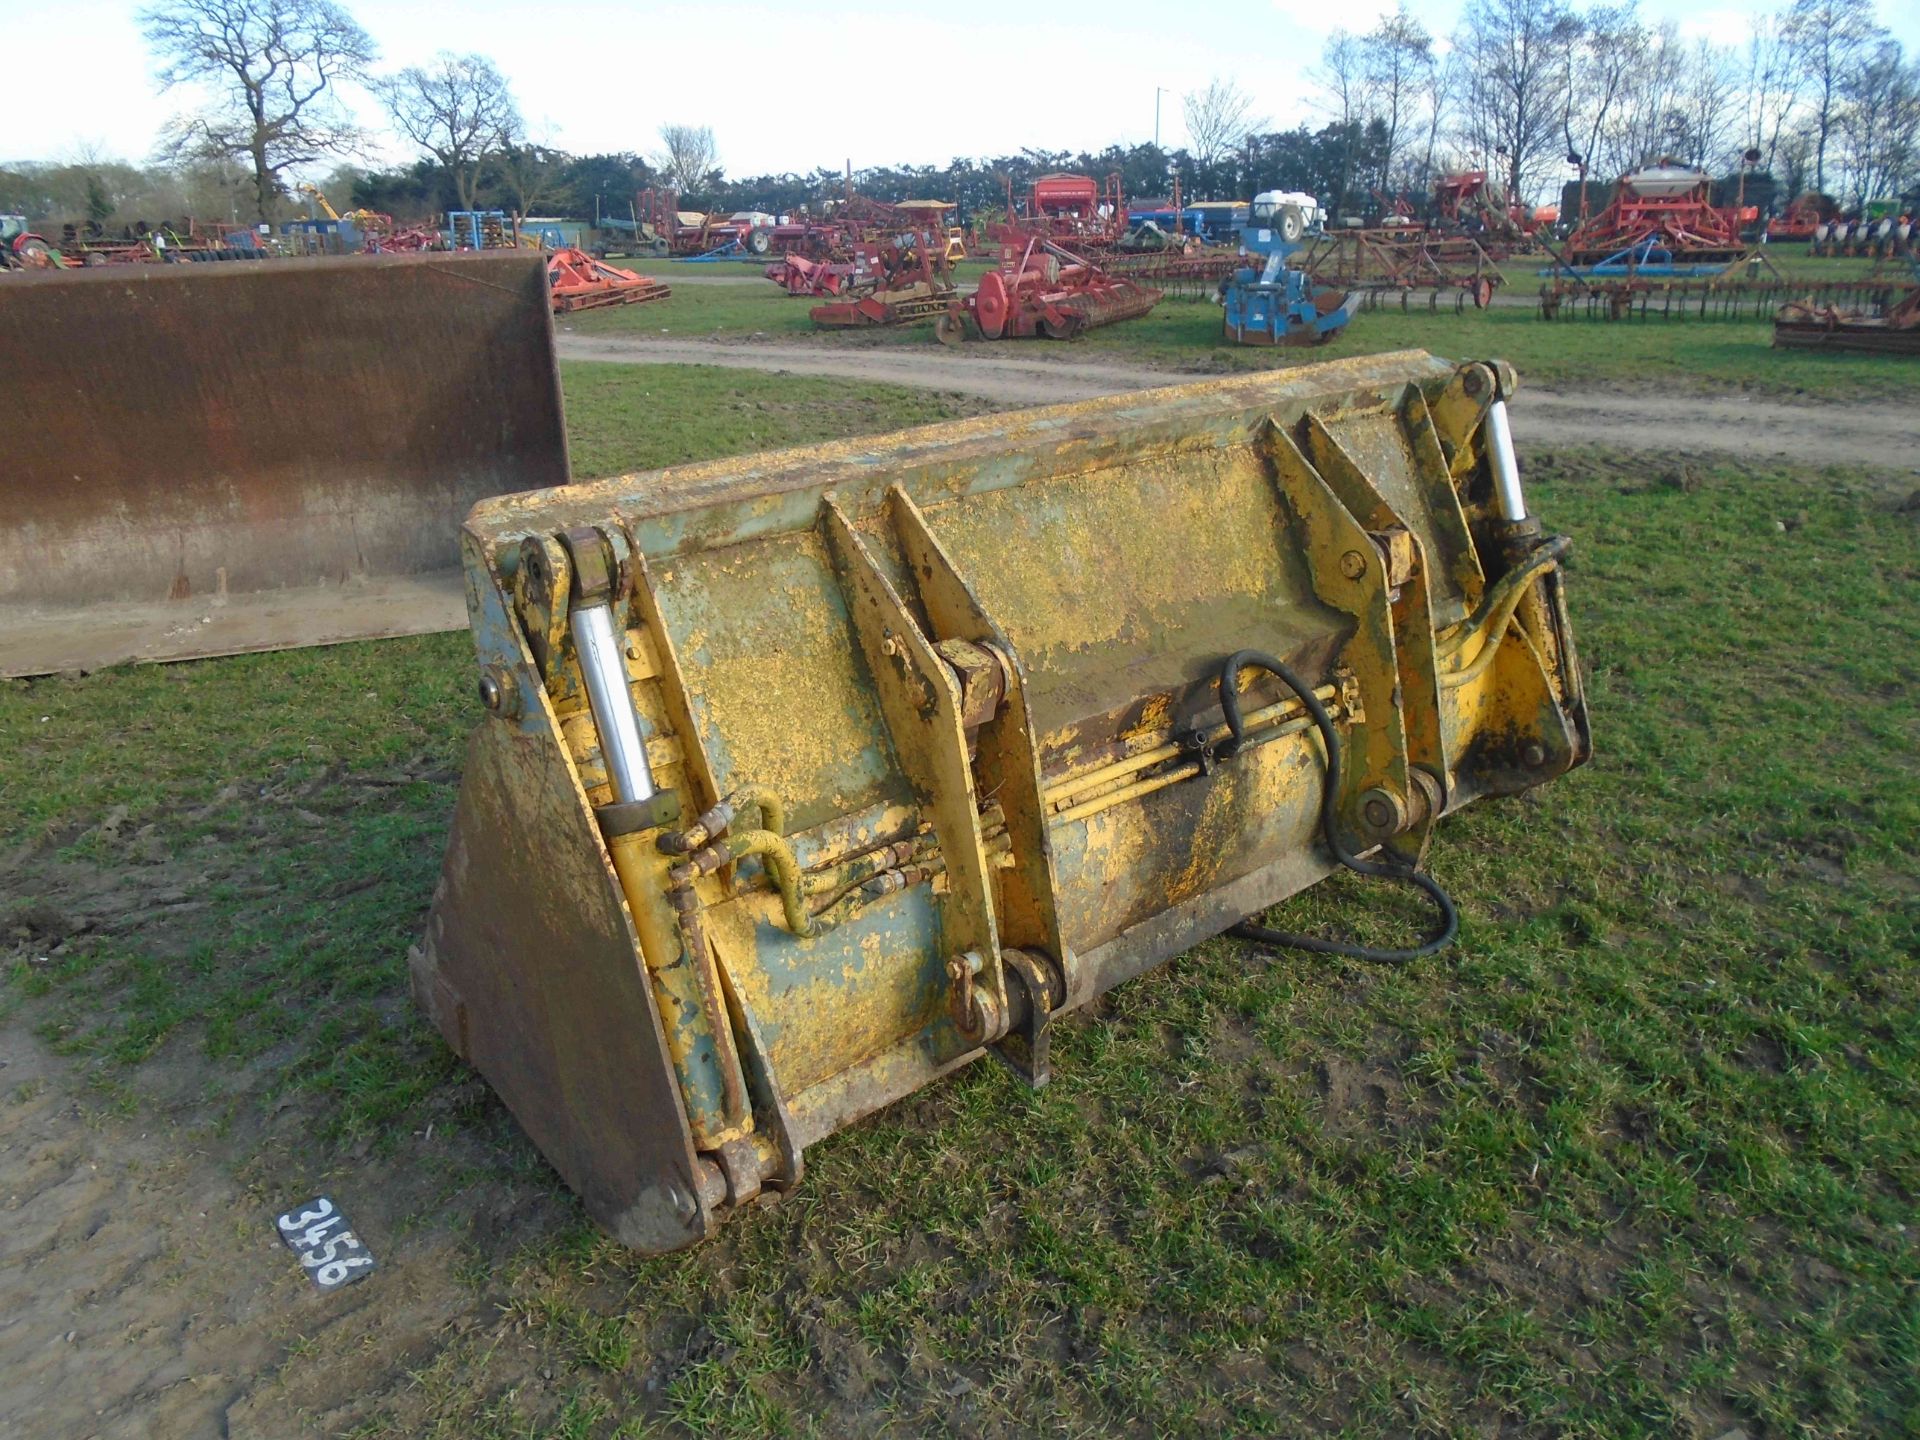 3456 4 in 1 bucket for MF tractor - Image 2 of 2